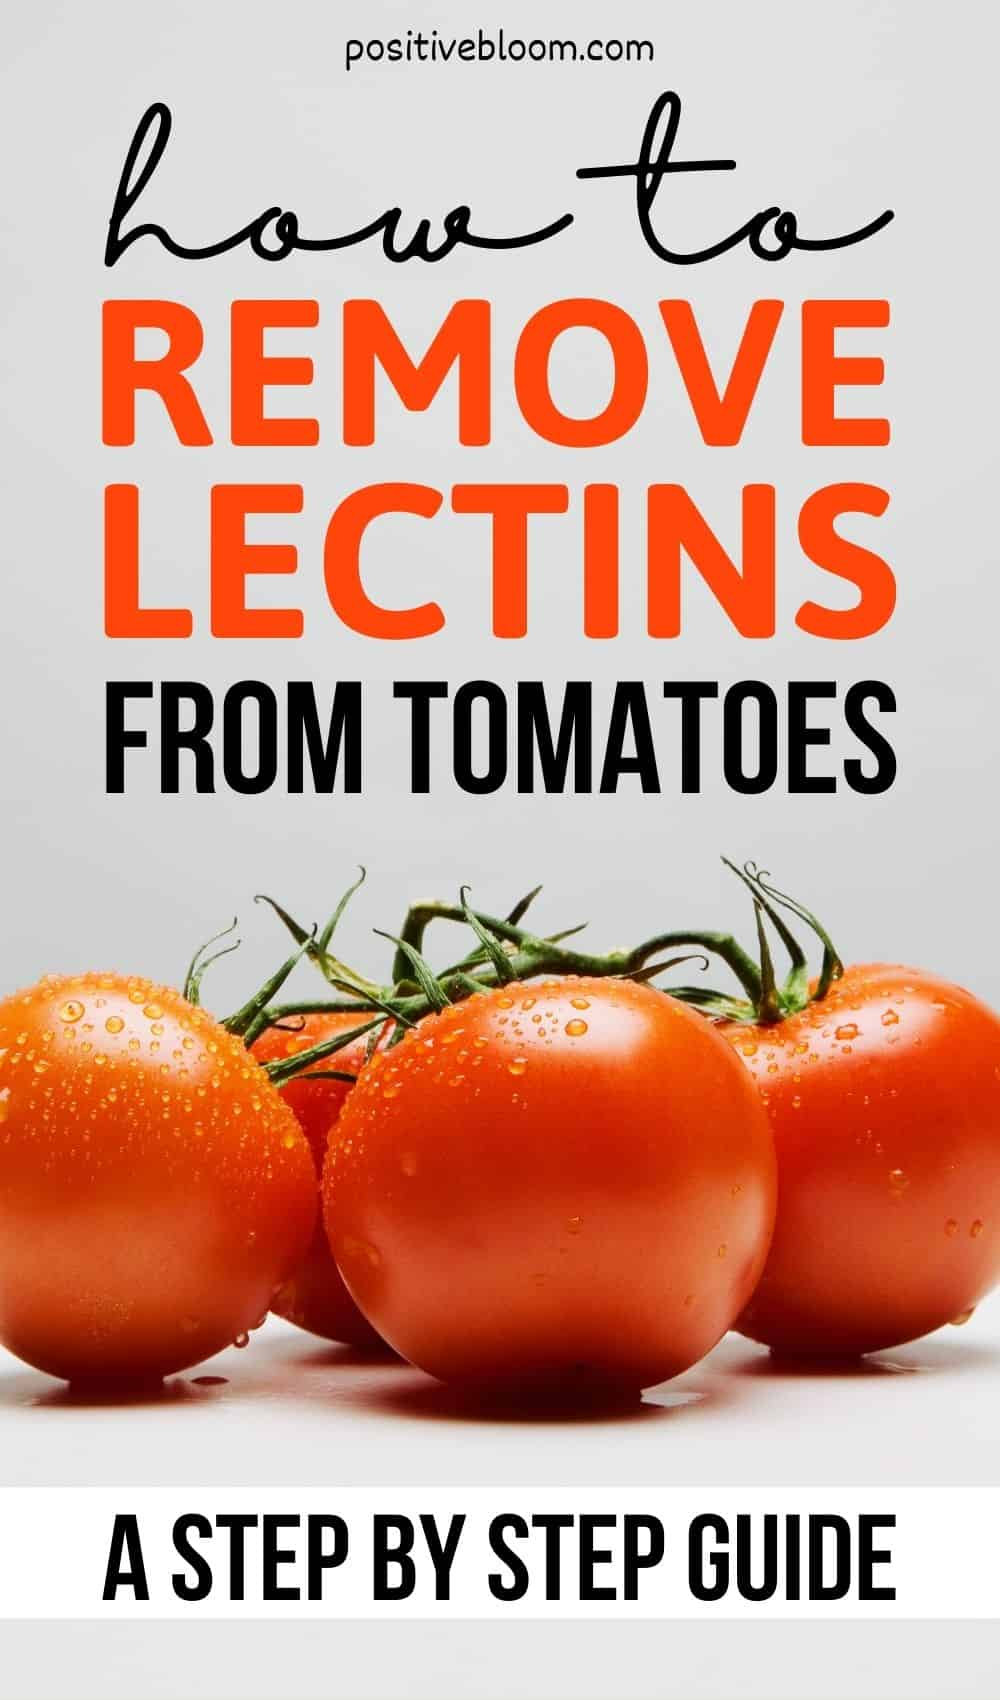 How To Remove Lectins From Tomatoes – A Step By Step Guide